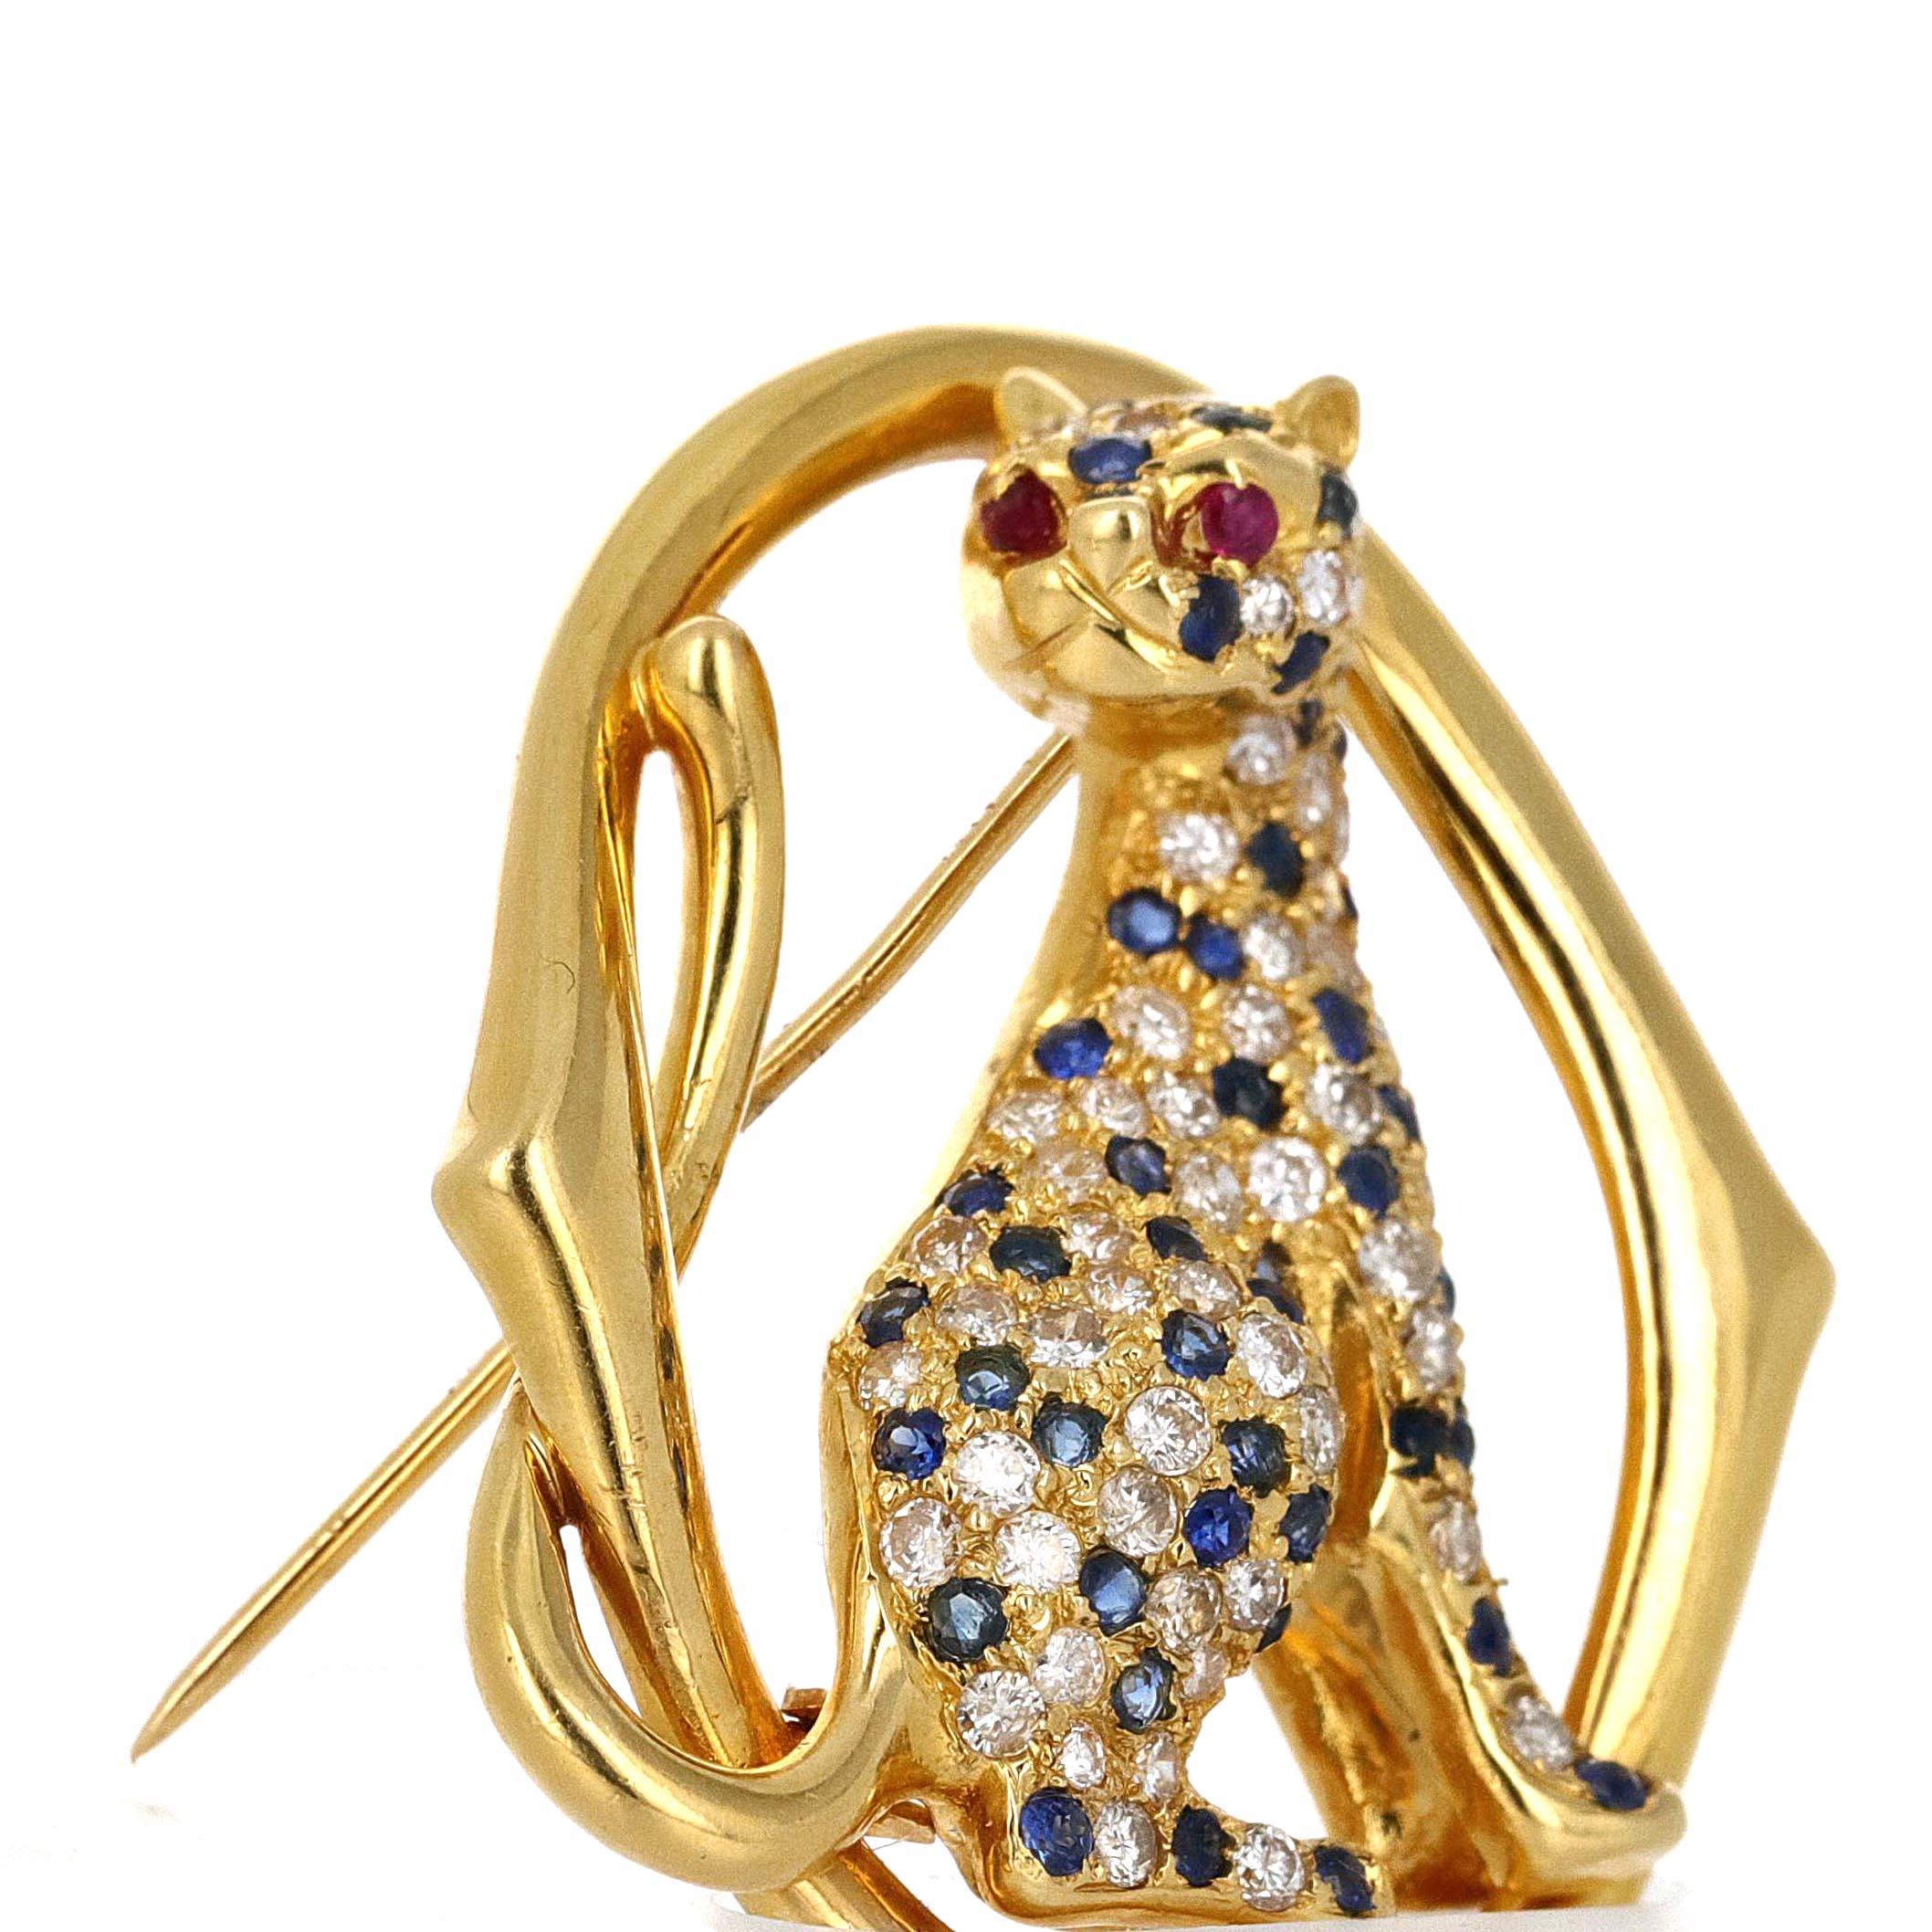 18 karat yellow gold Panther brooch. The body is adorned with round white diamonds and round blue sapphires. The panthers eyes are made with rubies. This is a very clean and sleek design. This can be worn by both male and female. It's a great pin to